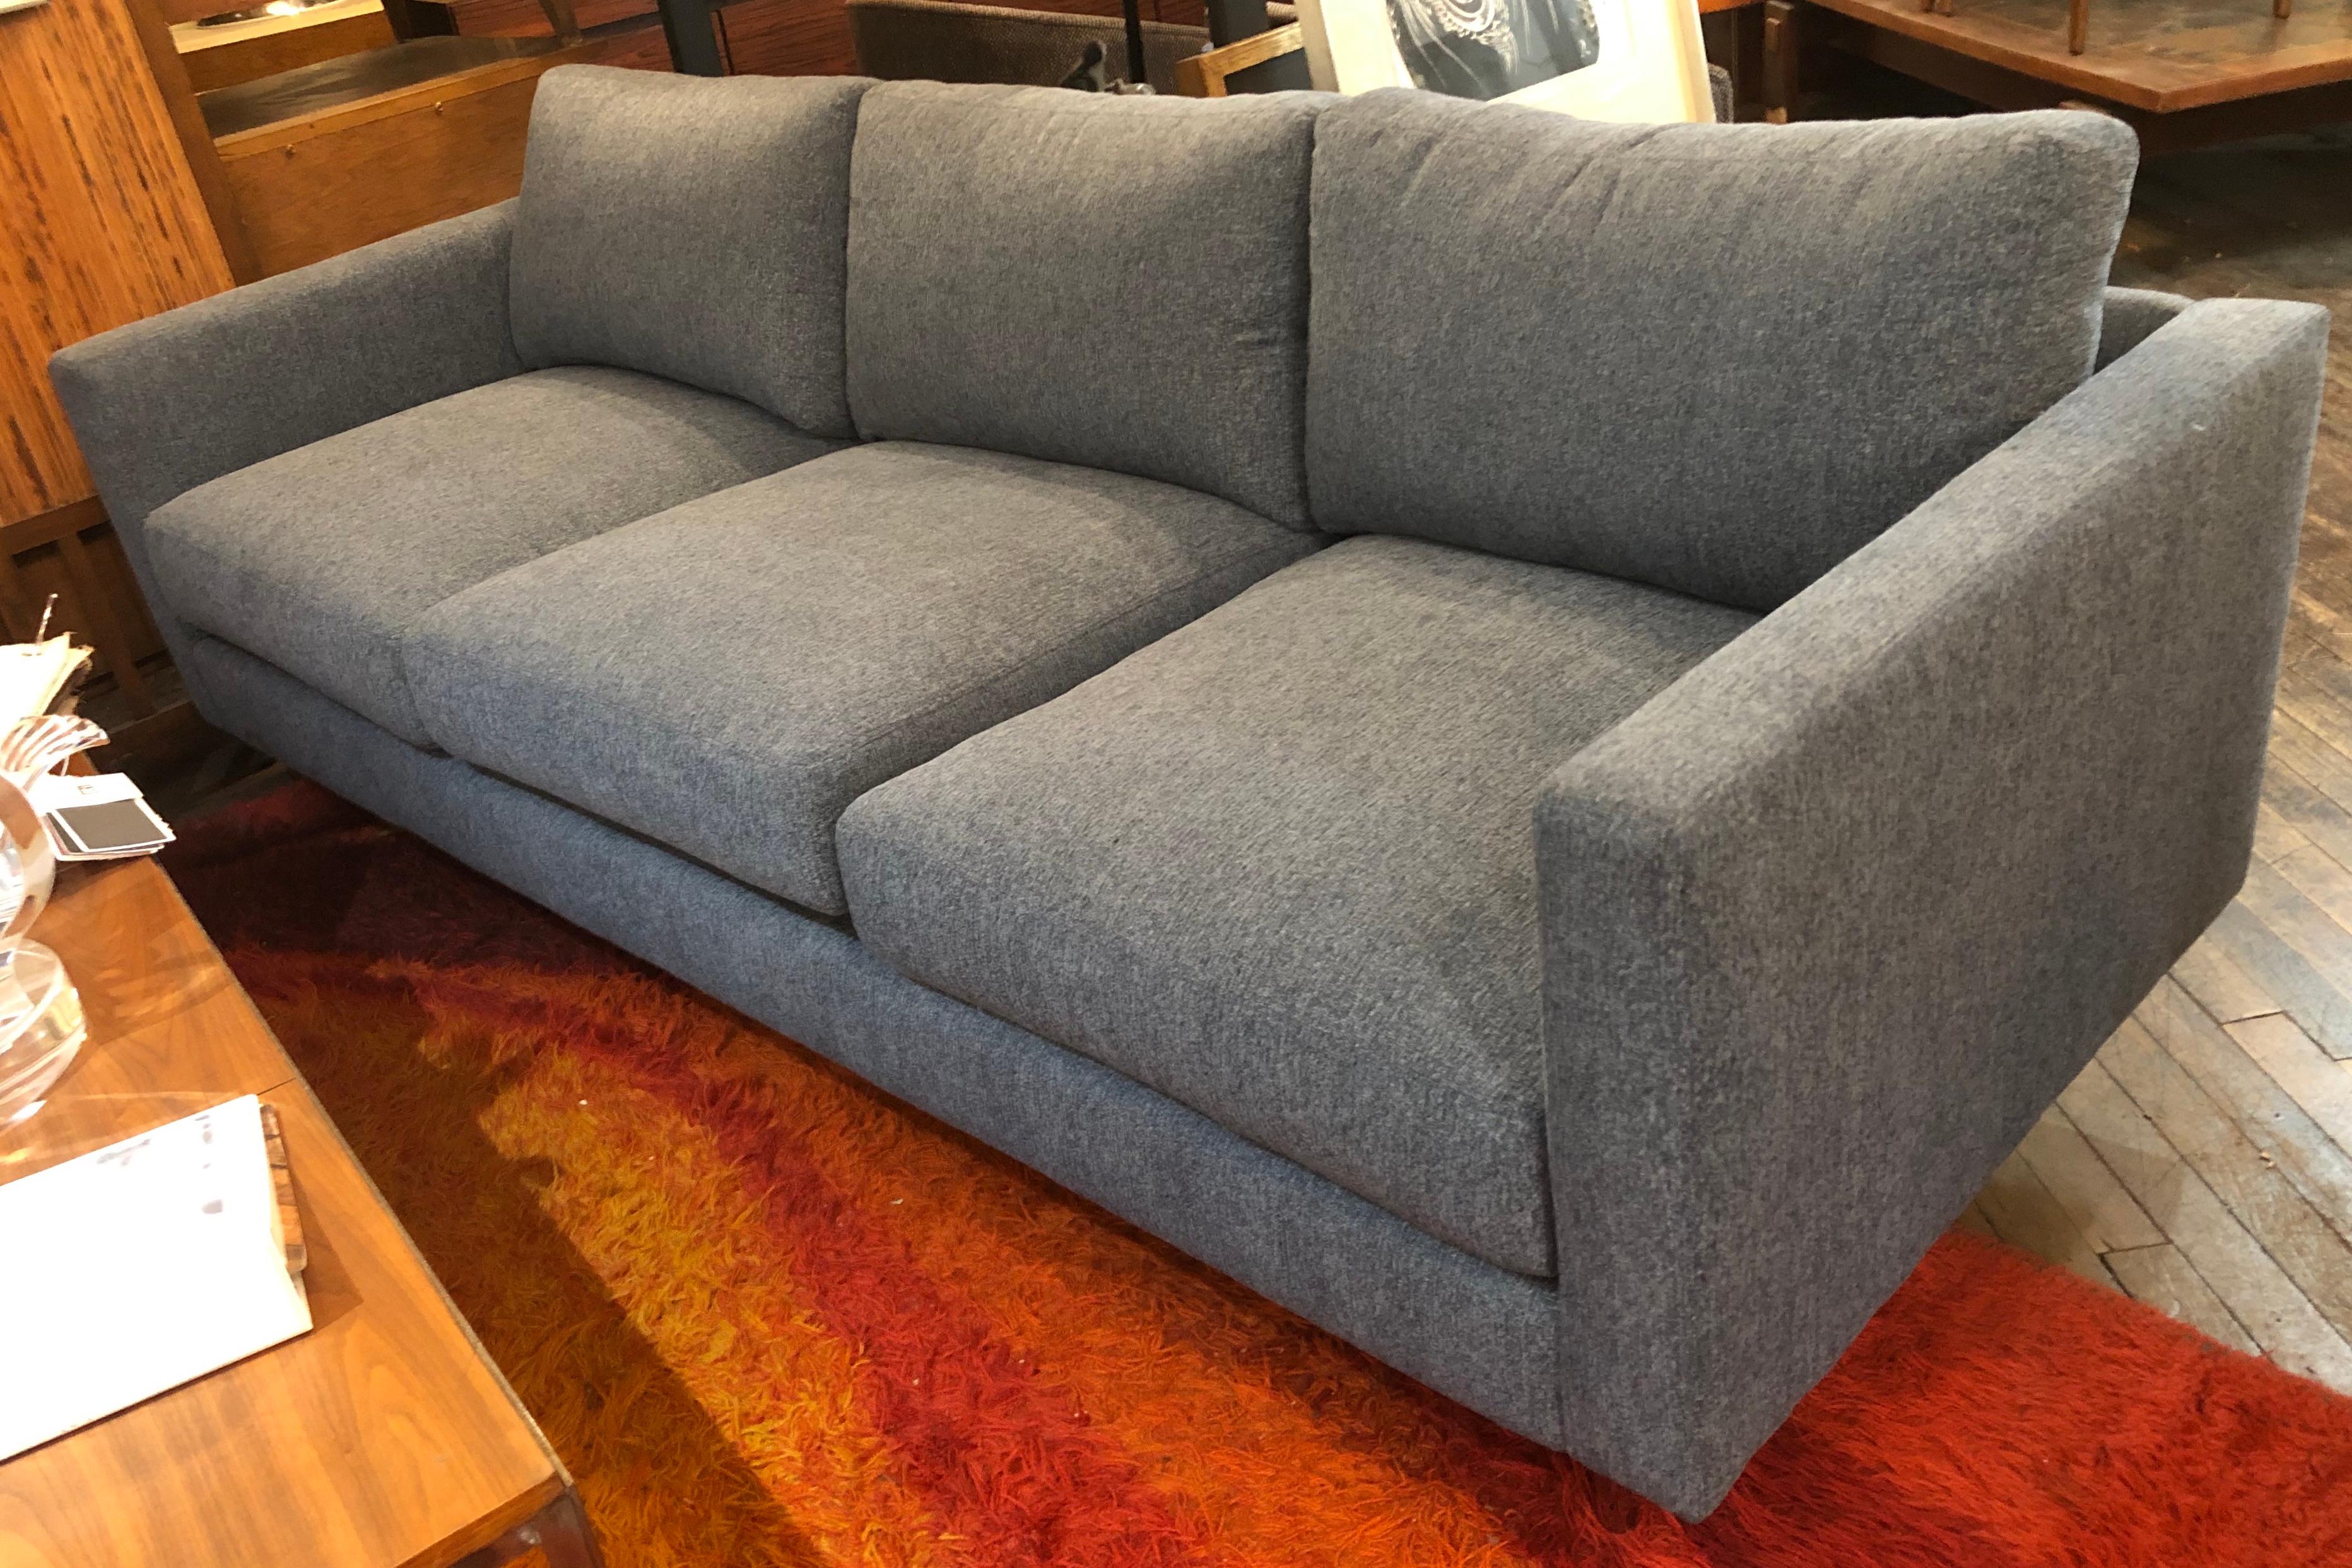 Designed by Milo Baughman in 1964, this simple and handsome sofa is still the perfect fit for a modern home. Three soft seats, fully upholstered frame, set on polished chrome legs. Covered in a blue performance polyester fabric.
Please confirm